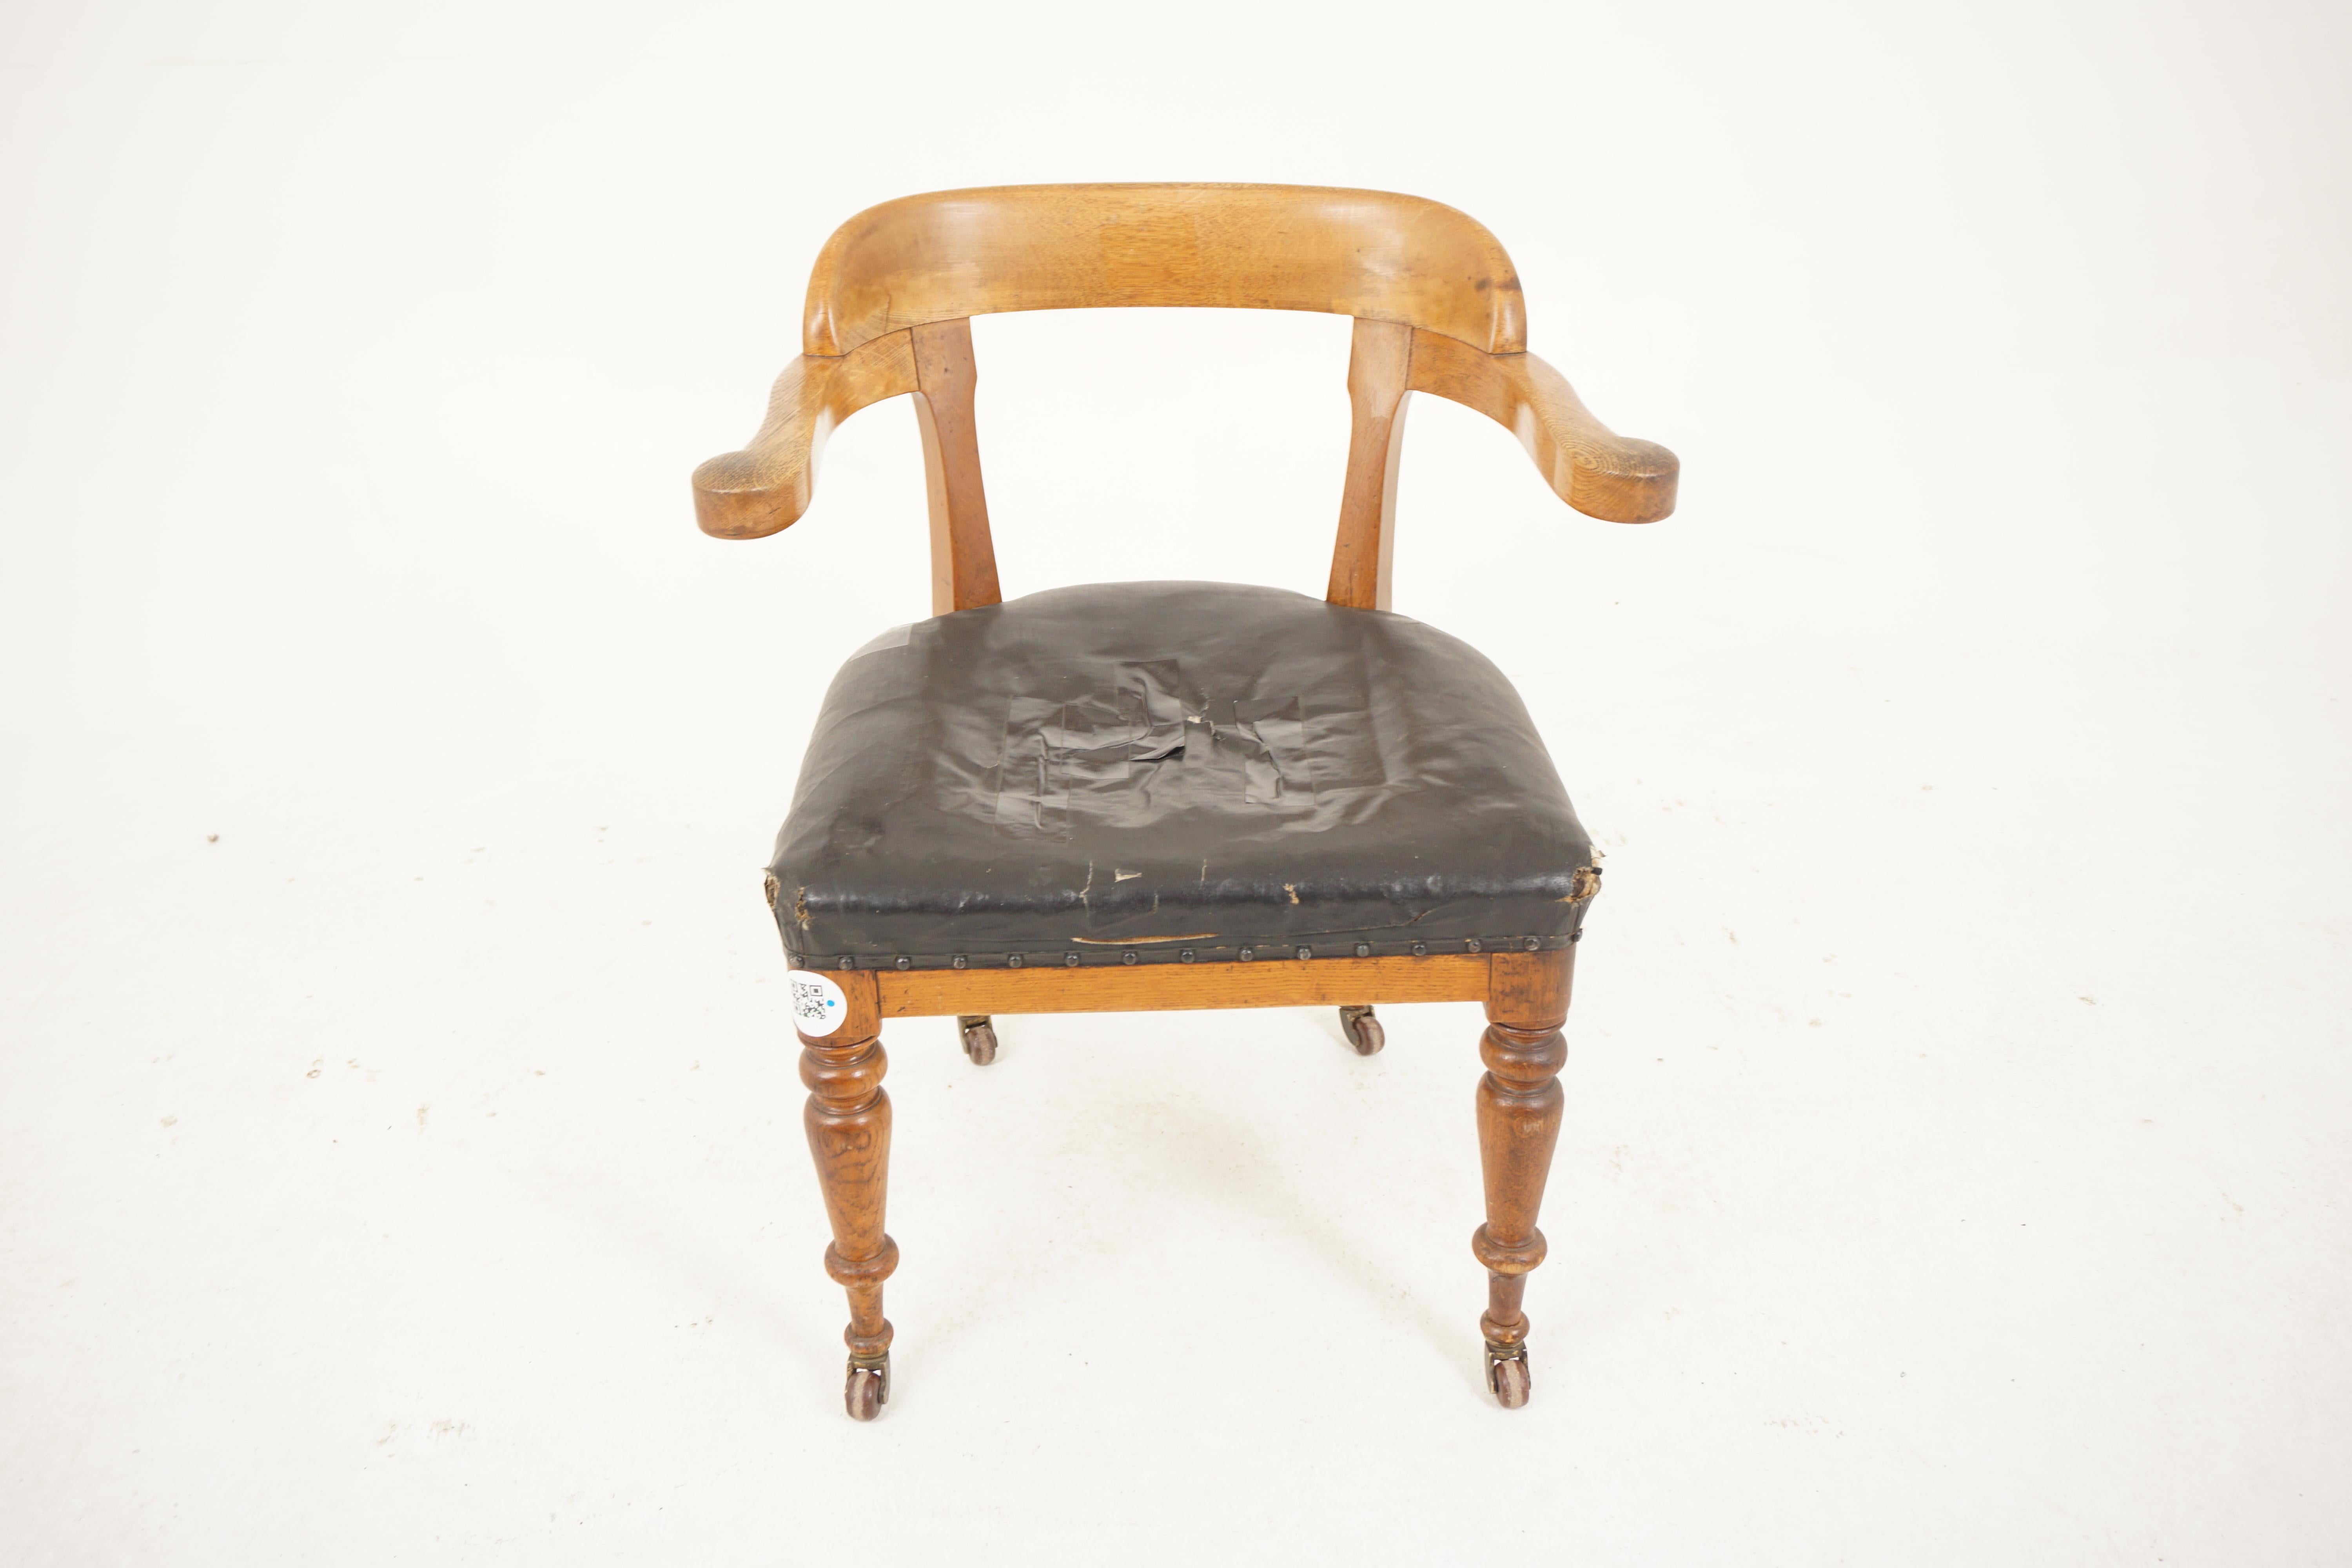 Ant. Victorian oak desk chair, arm chair, Scotland 1880, H087

Scotland 1880
Solid Oak
Original Finish
Rounded Back
Thick open arms
Large upholstered seat
All standing on a pair of turned legs to the front
Two thick rectangular legs to the back
With